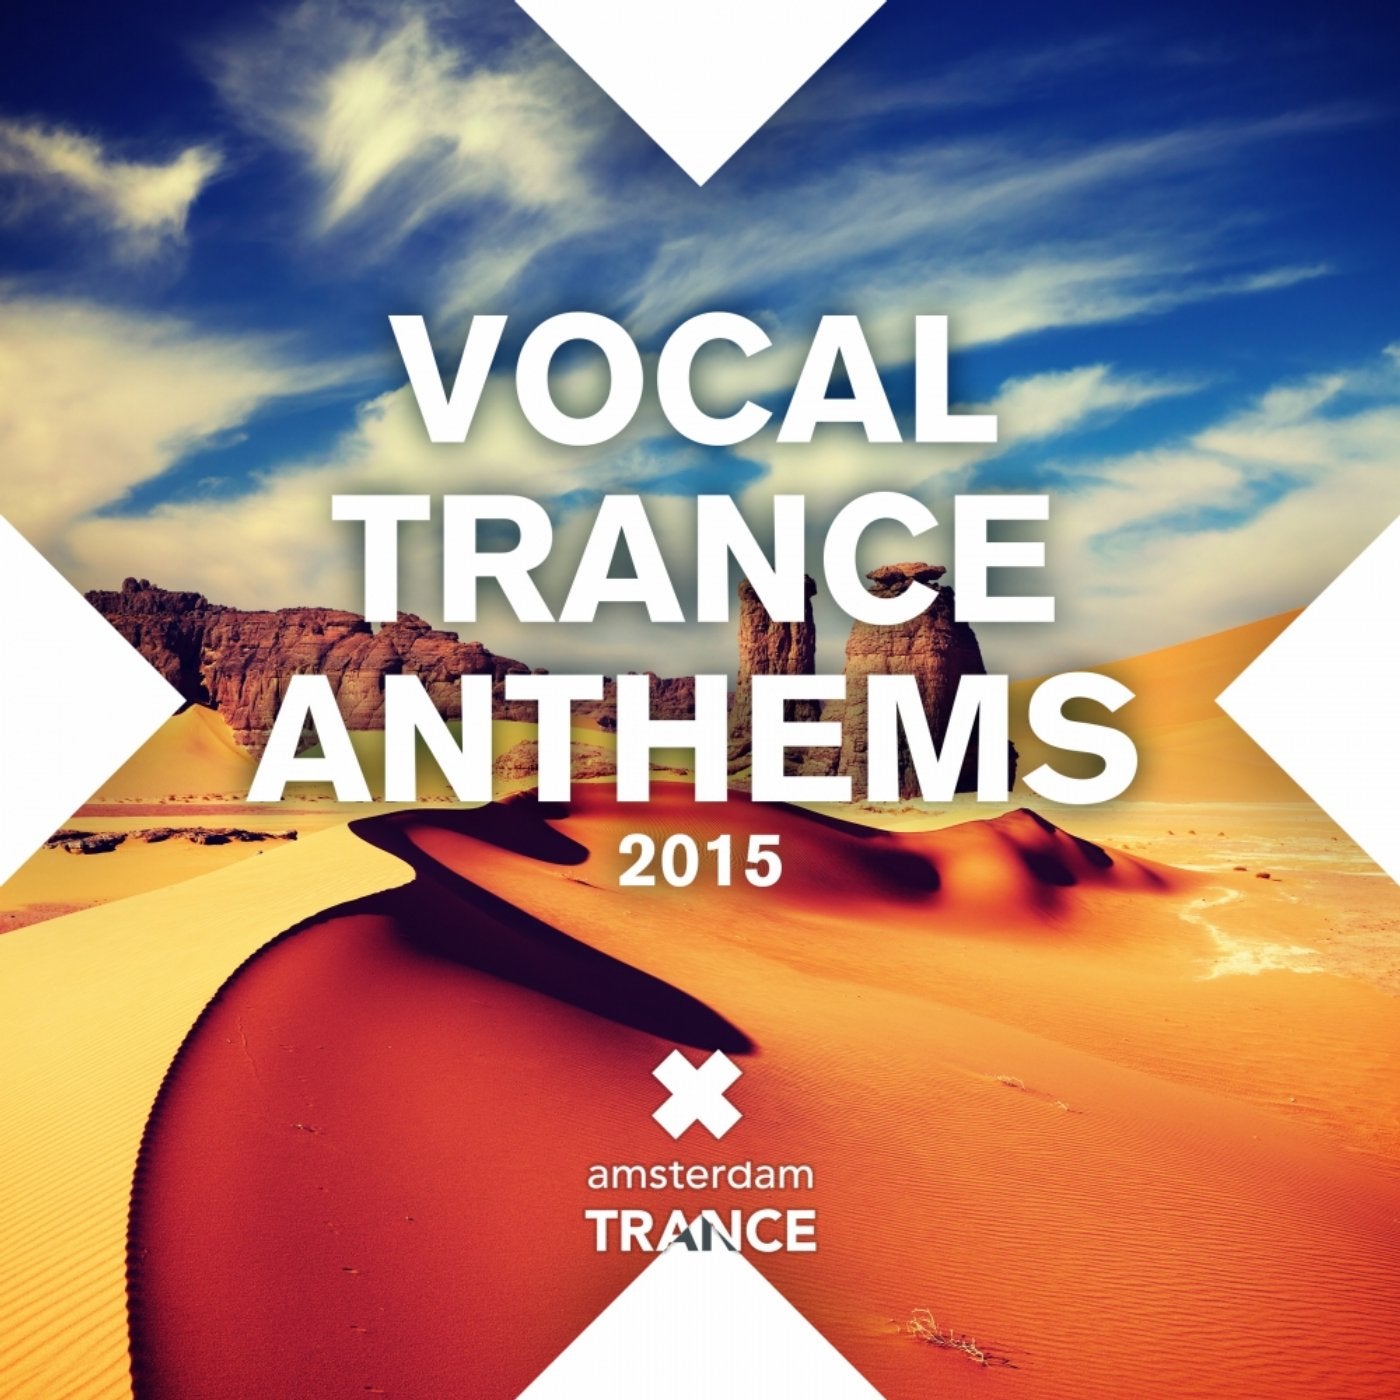 Vocal Trance Anthems 2015